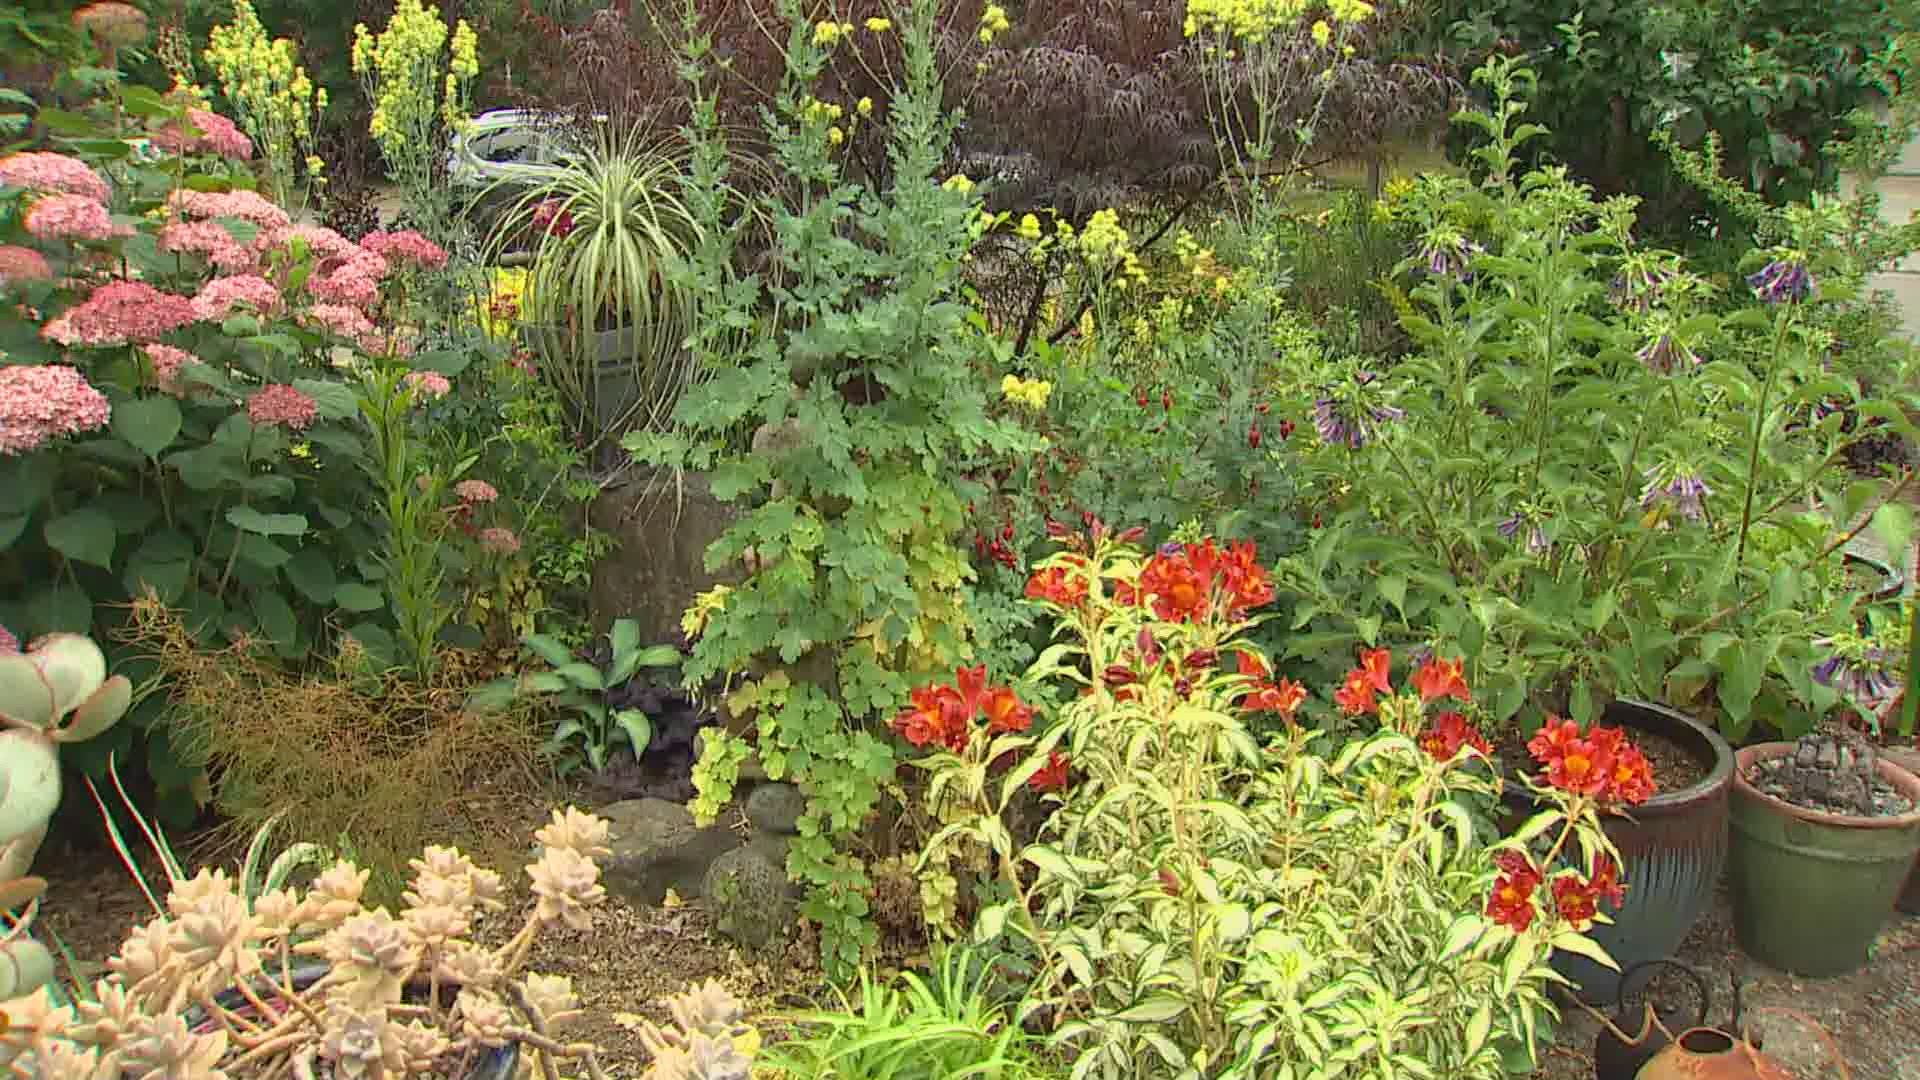 Gardening expert Ciscoe Morris shares tips to know when plants in your garden have died and can't be recovered.